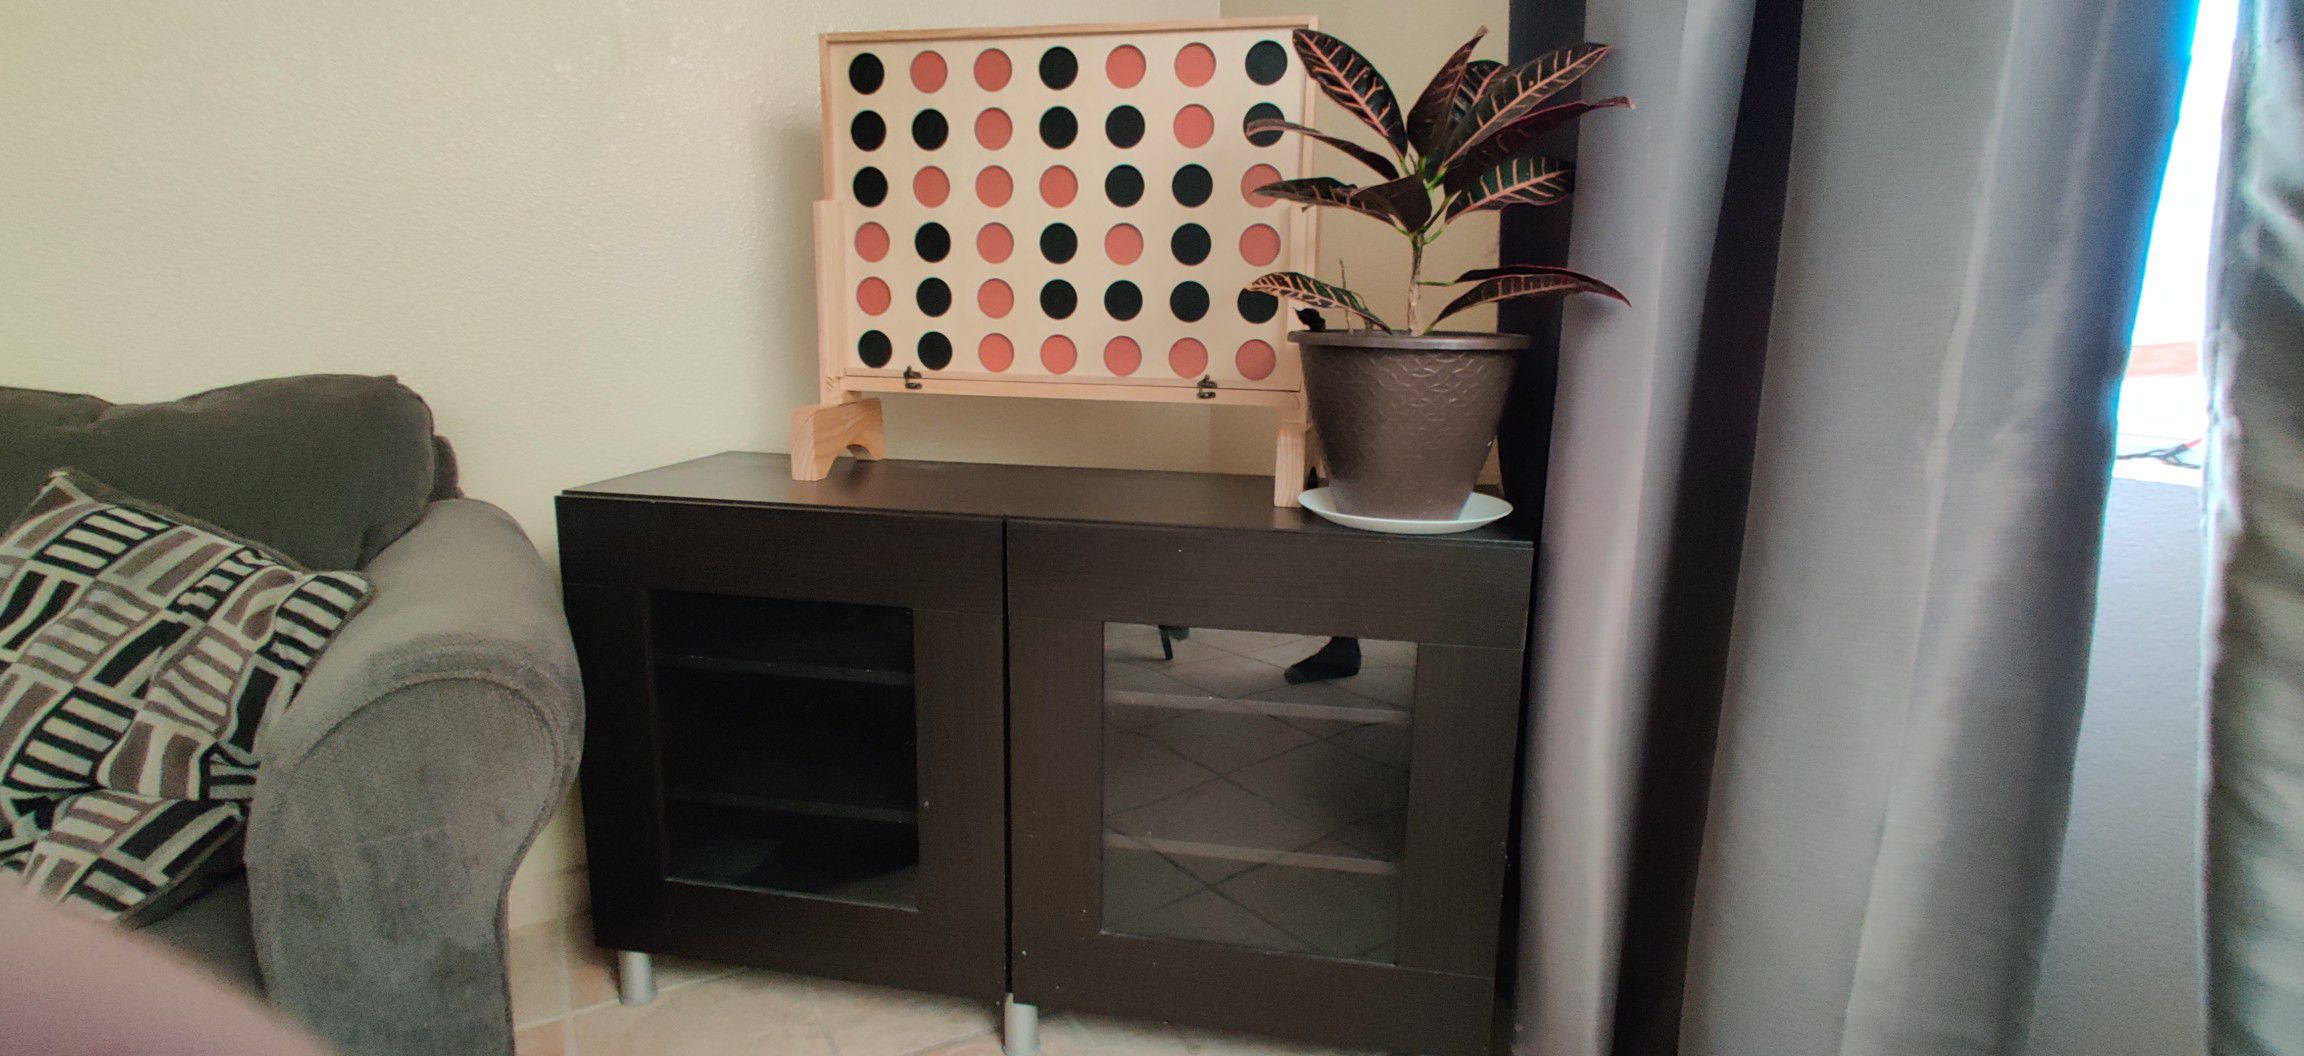 IKEA Brand TV stand with 3 shelves for storage